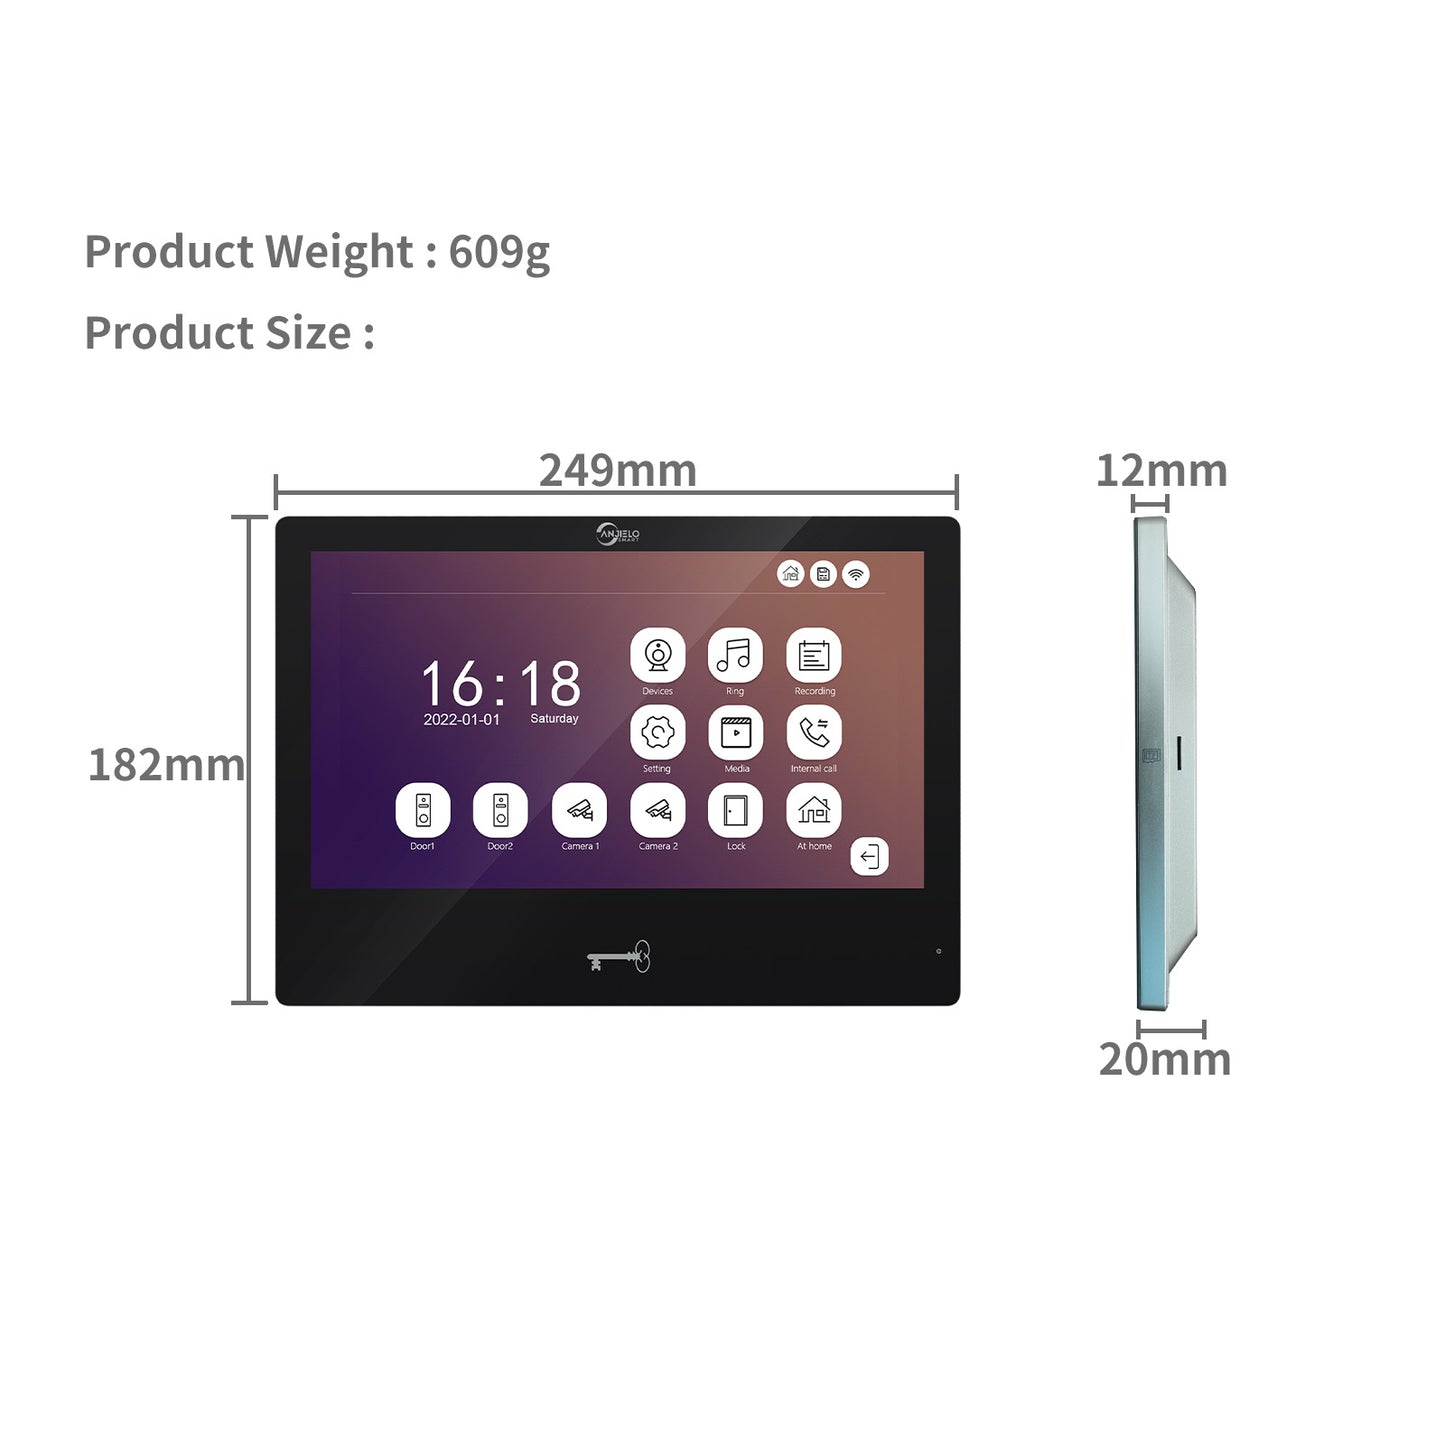 AnjieloSmart 10 inch Touch Screen with  Wide Angle Doorbell camera Video Intercom System  For Villa Home